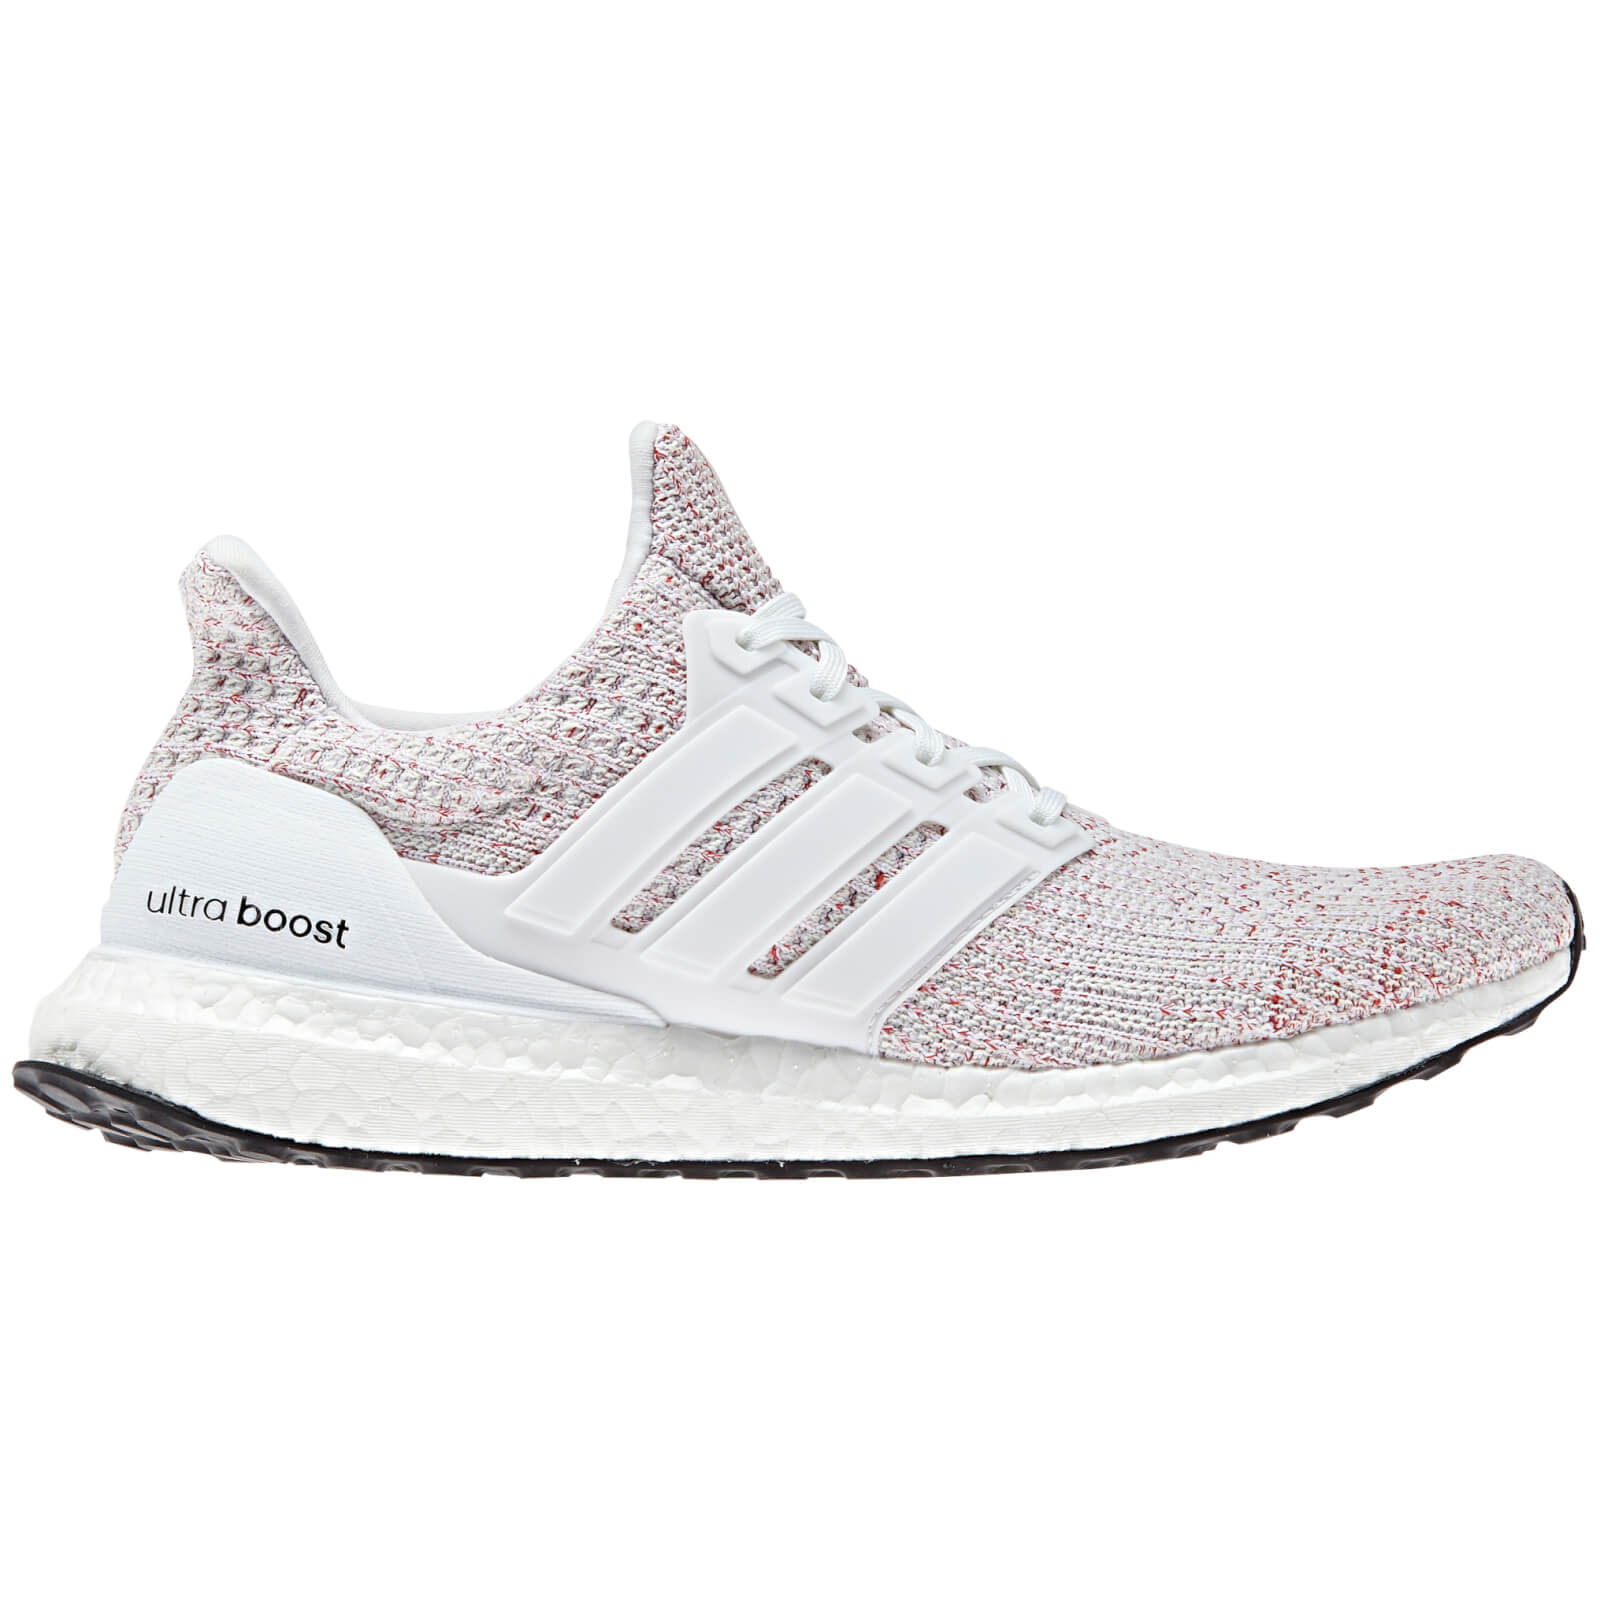 mens ultra boost red and white